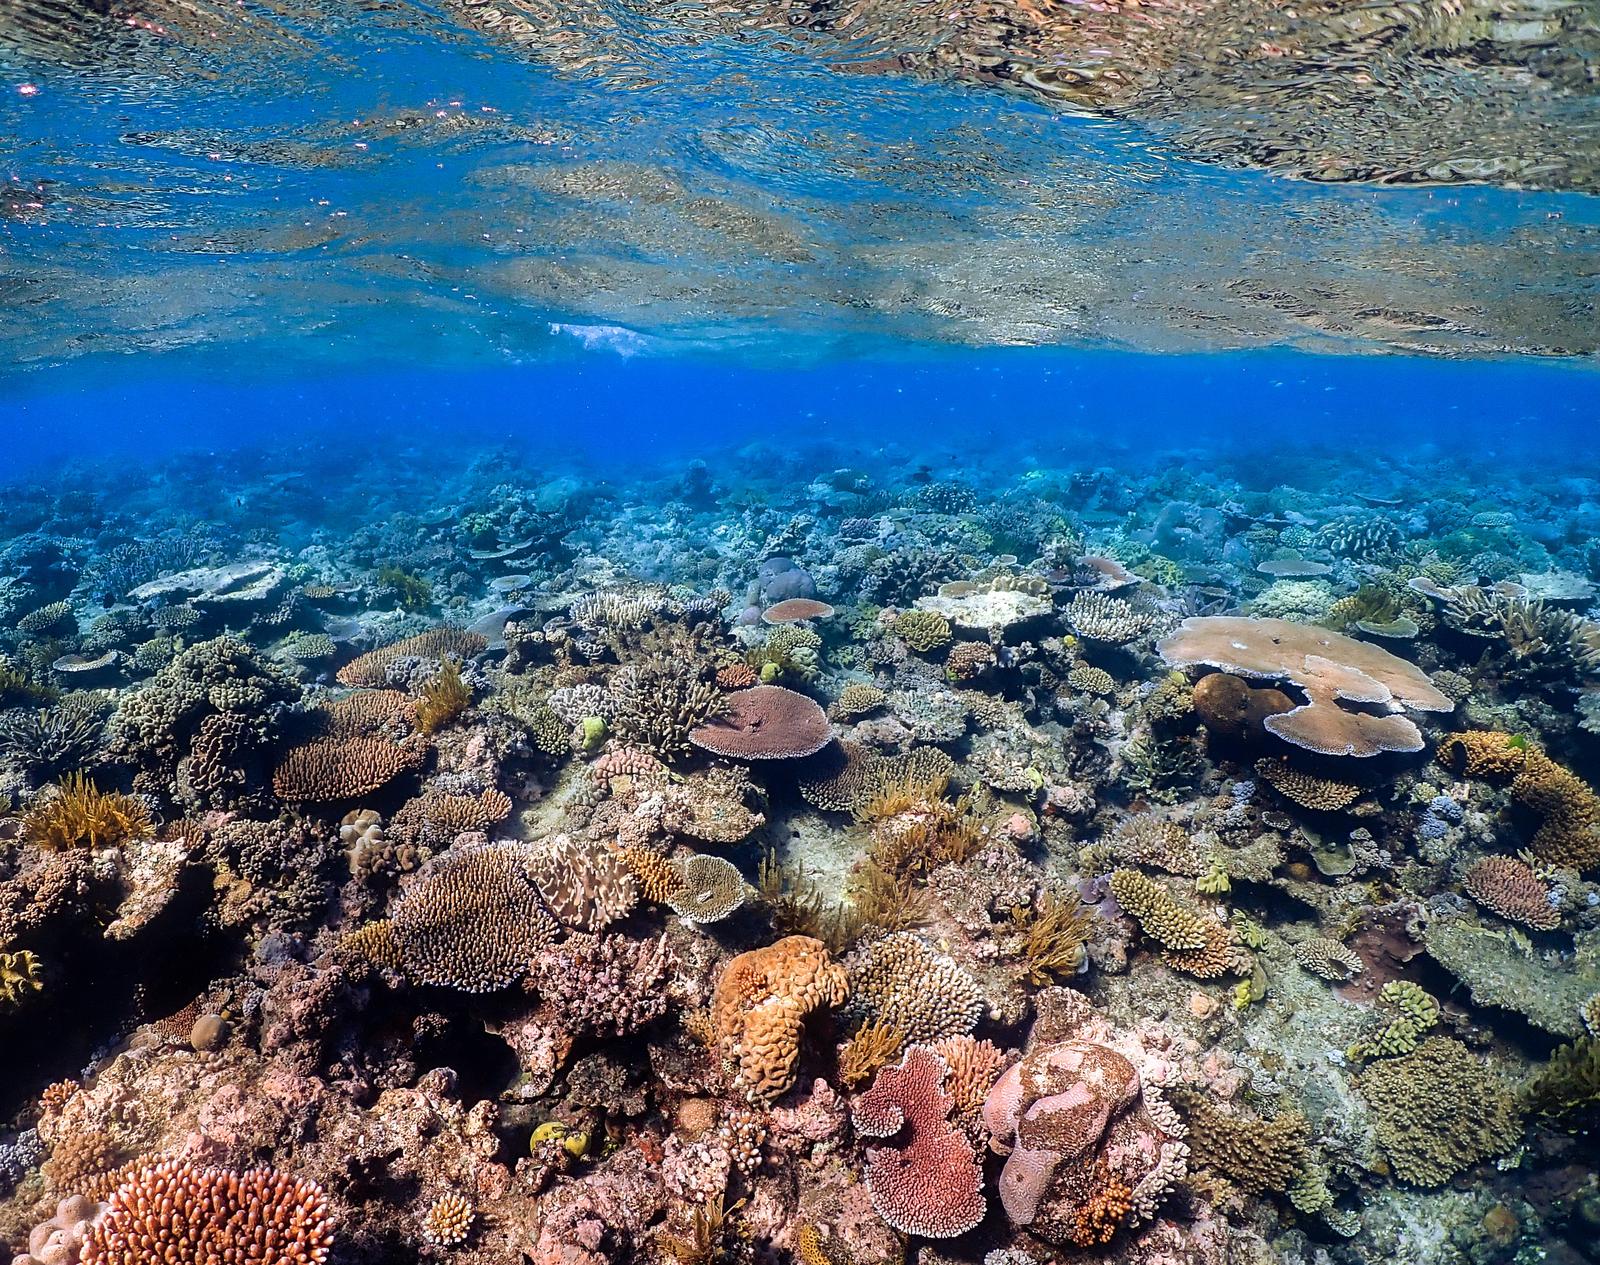 Here Are 24 Glorious Natural Attractions – Can You Match Them to Their Country? Great Barrier Reef